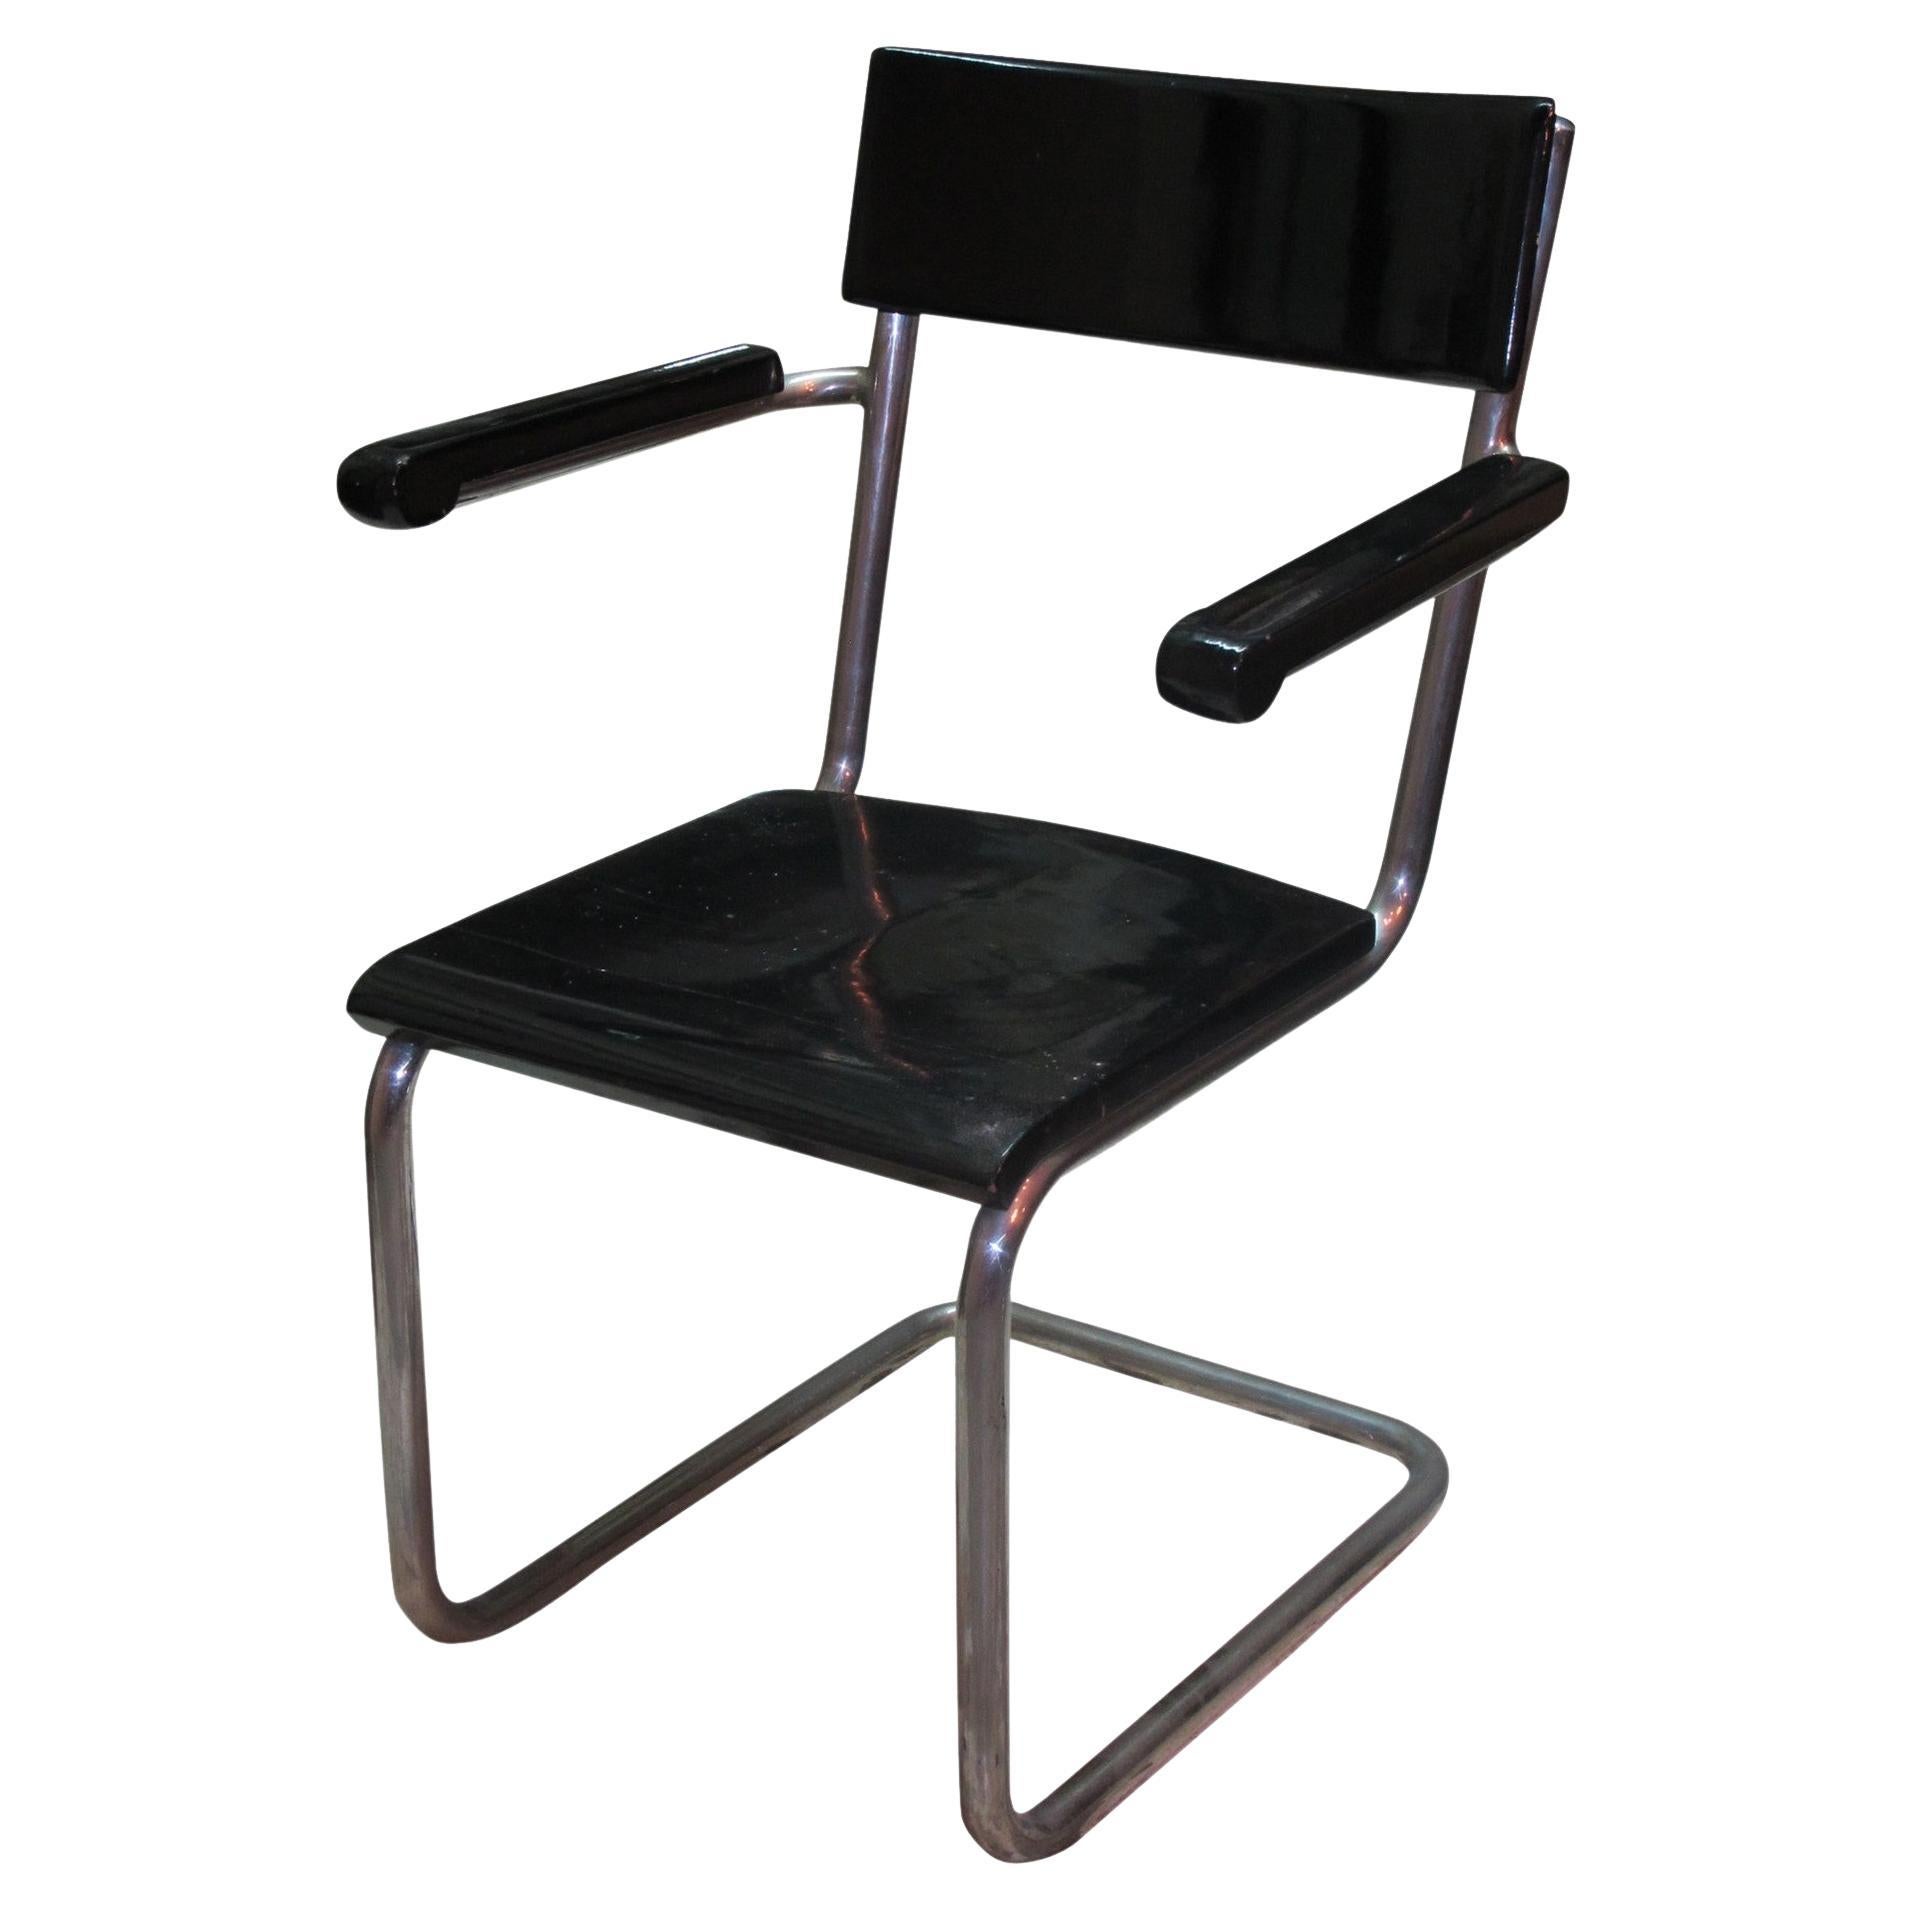 Armchair in Wood and Chrome, Style: Bauhaus, German, 1940 For Sale